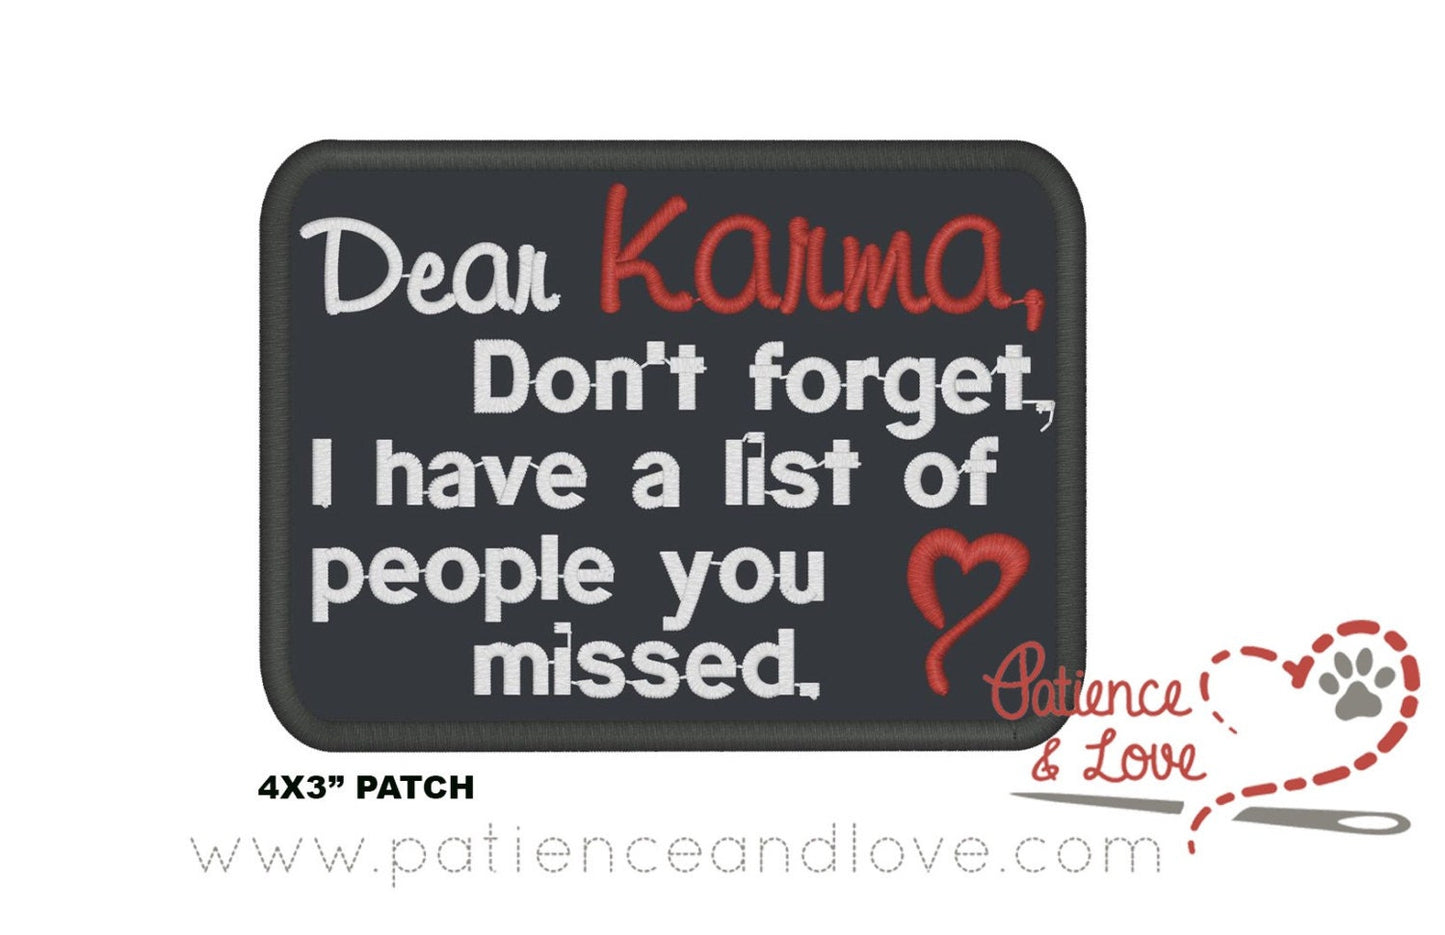 Dear Karma, don't forget, I have a list of people you missed, 4" x 3" embroidered patch